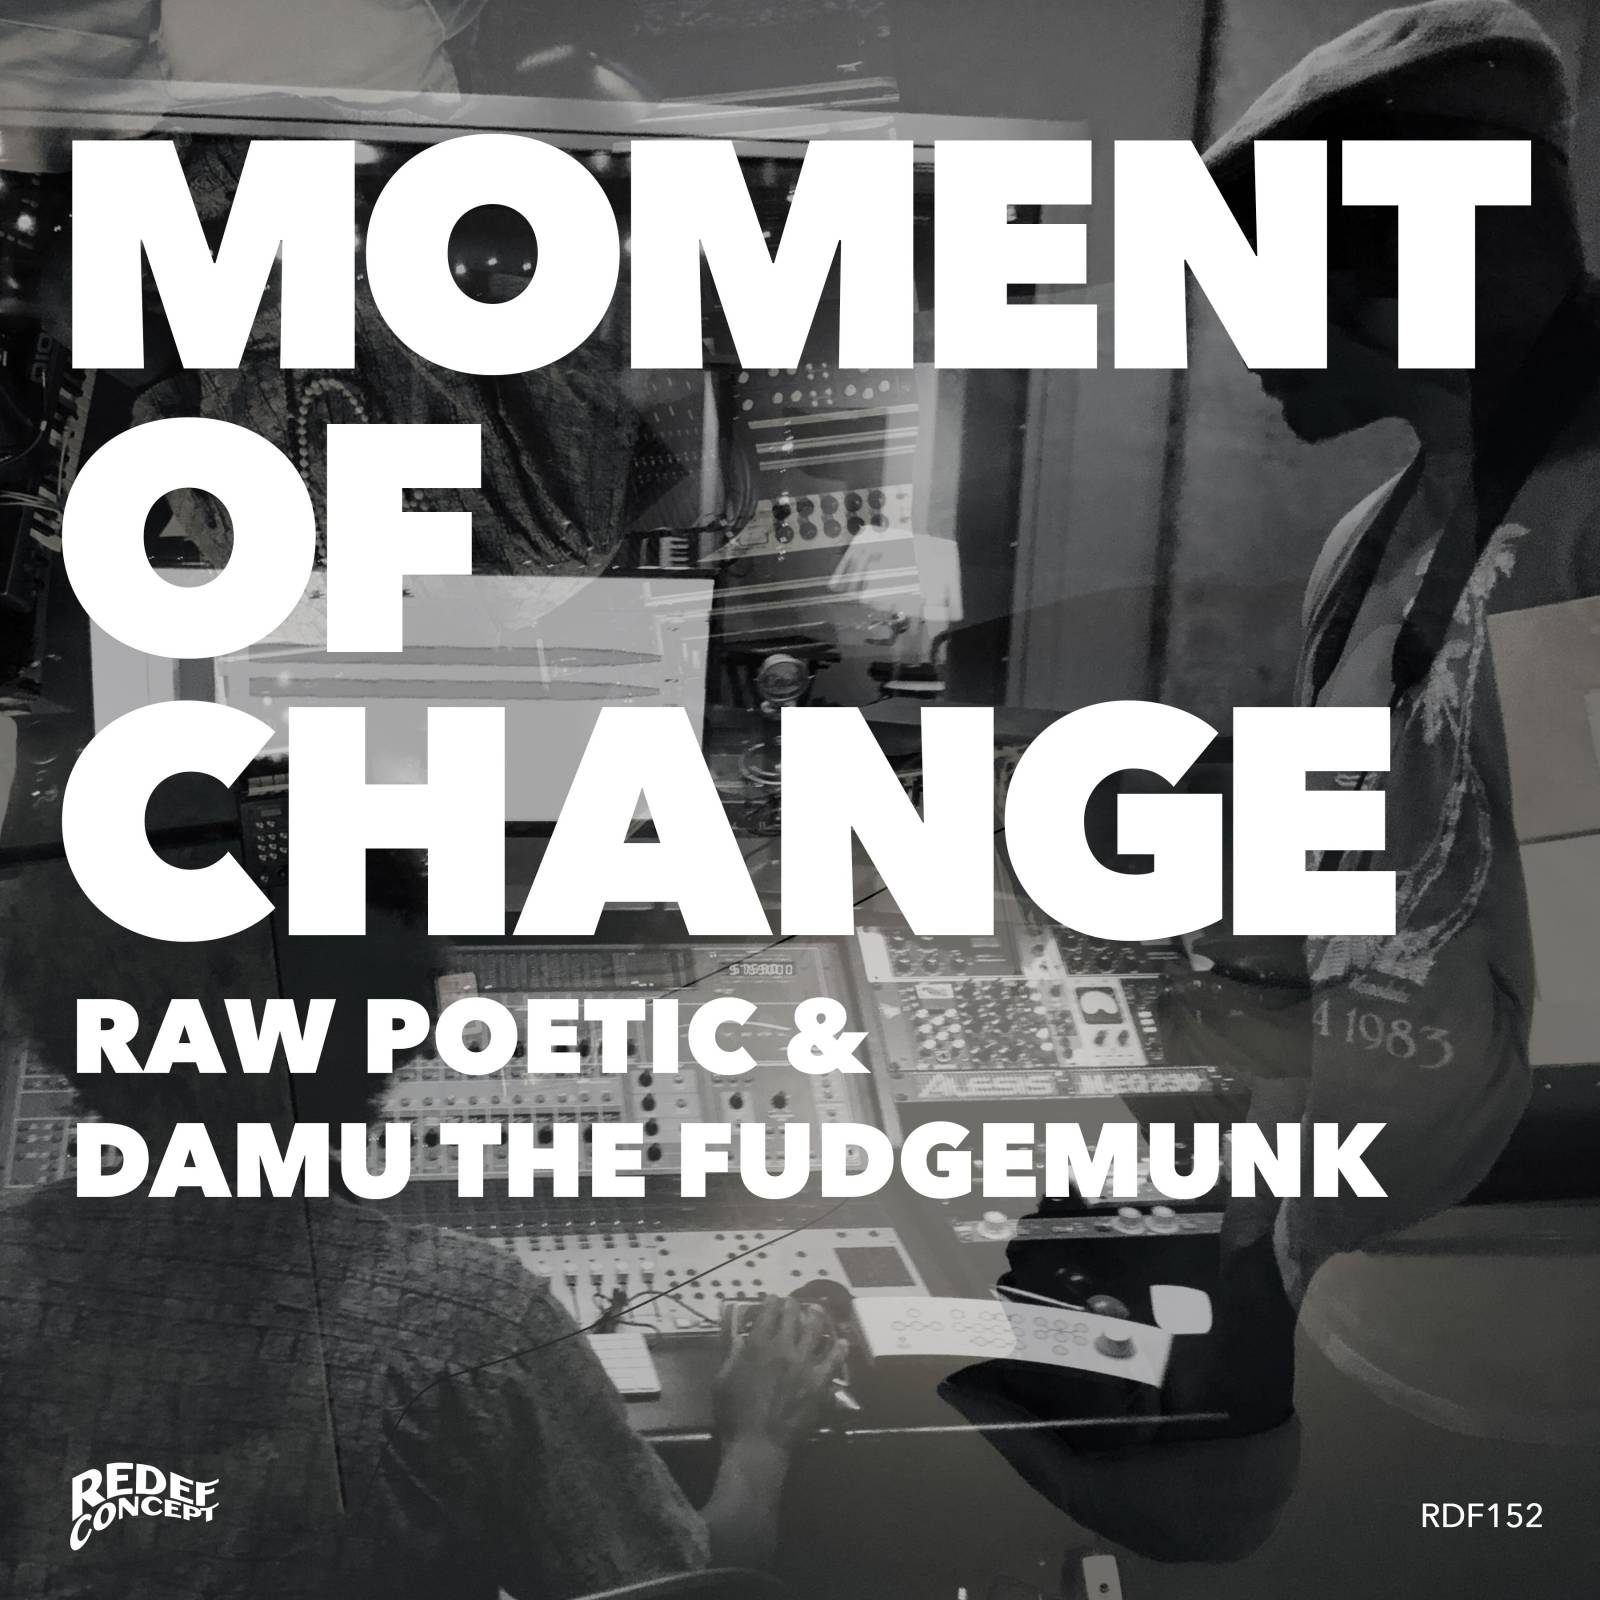 Raw Poetic Teams With Damu The Fudgemunk For 'Moment Of Change' LP